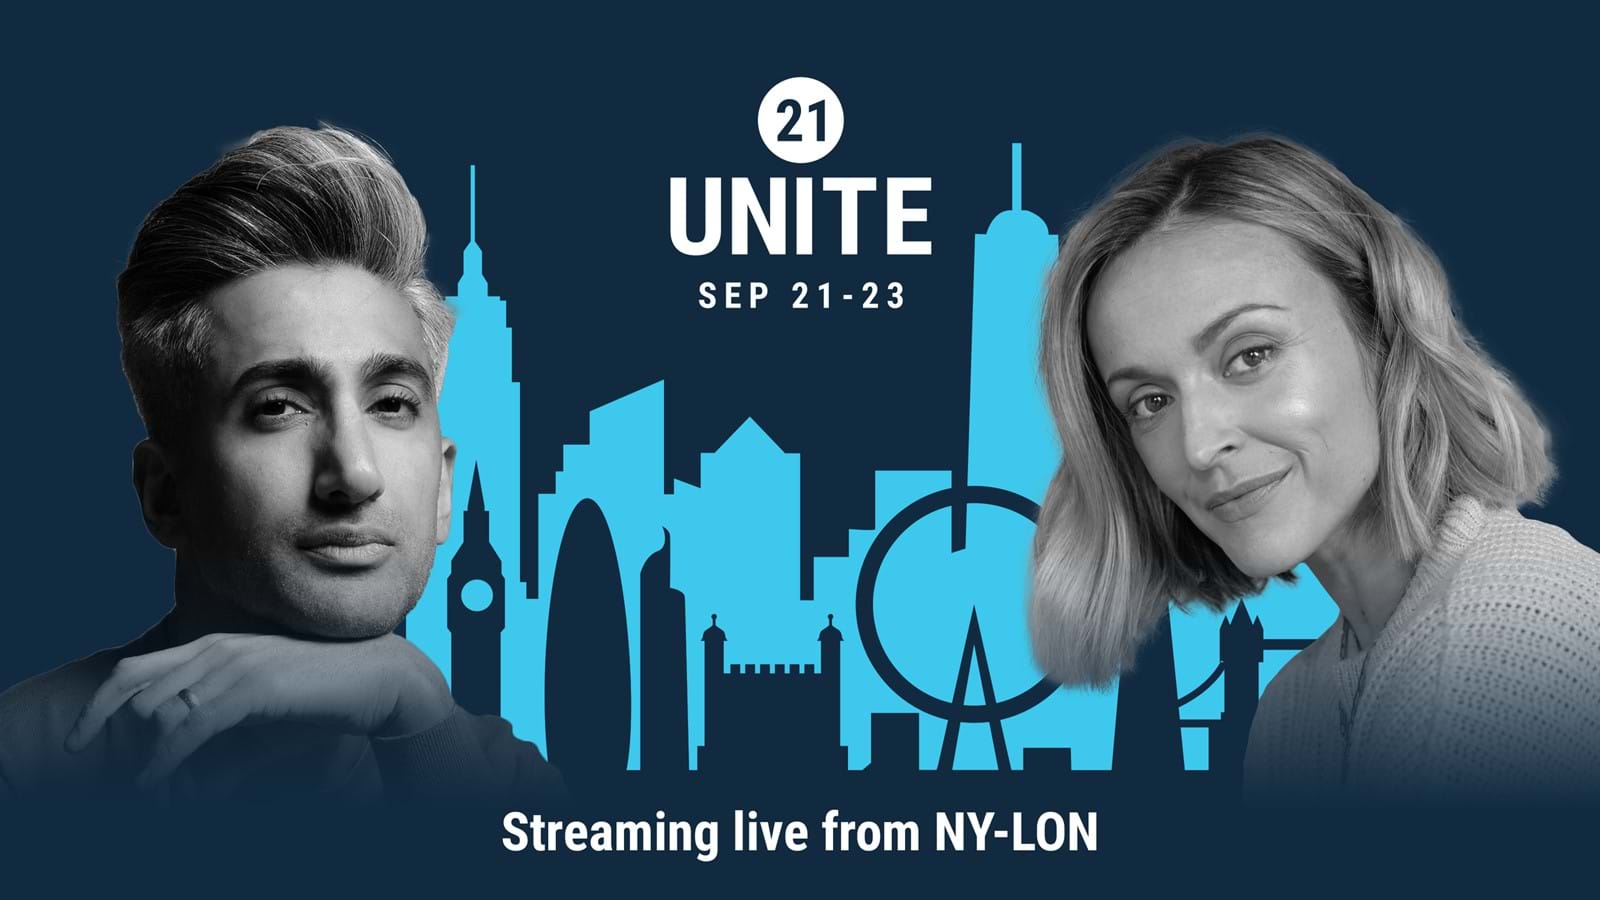 Unite 21 employee experience conference promotional image with Tan France and Fearne Cotton